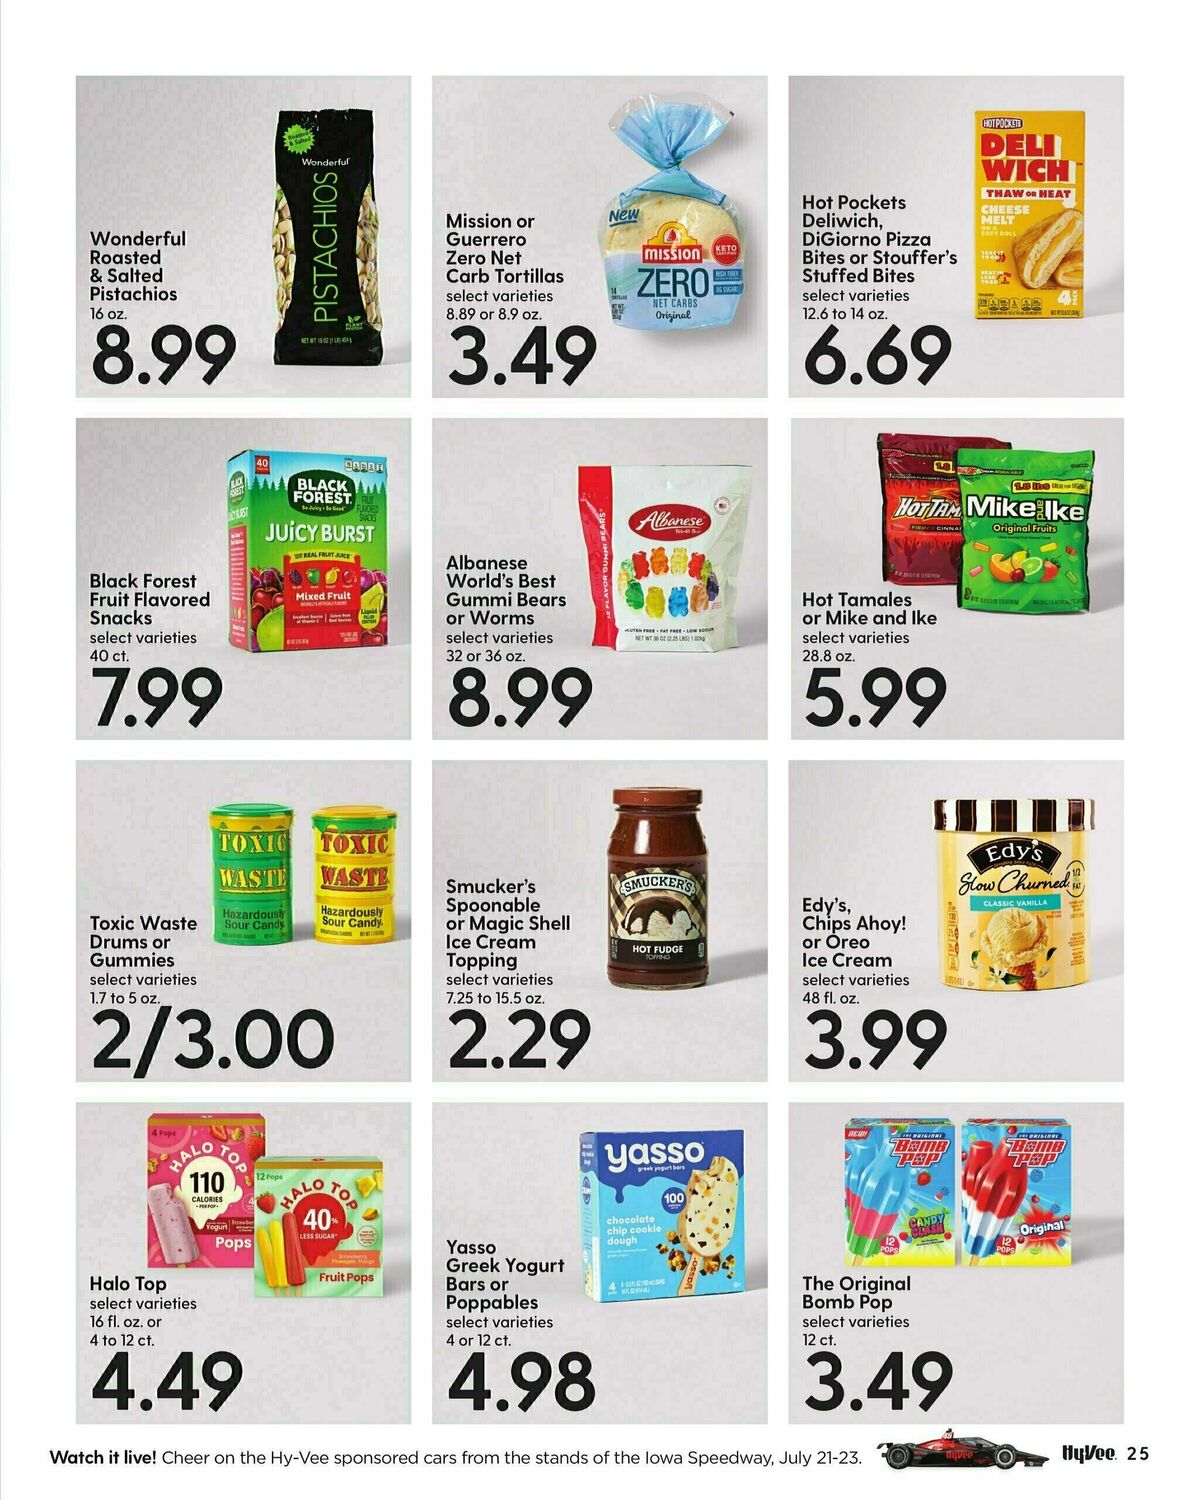 Hy-Vee July Coupon Book Weekly Ad from July 1